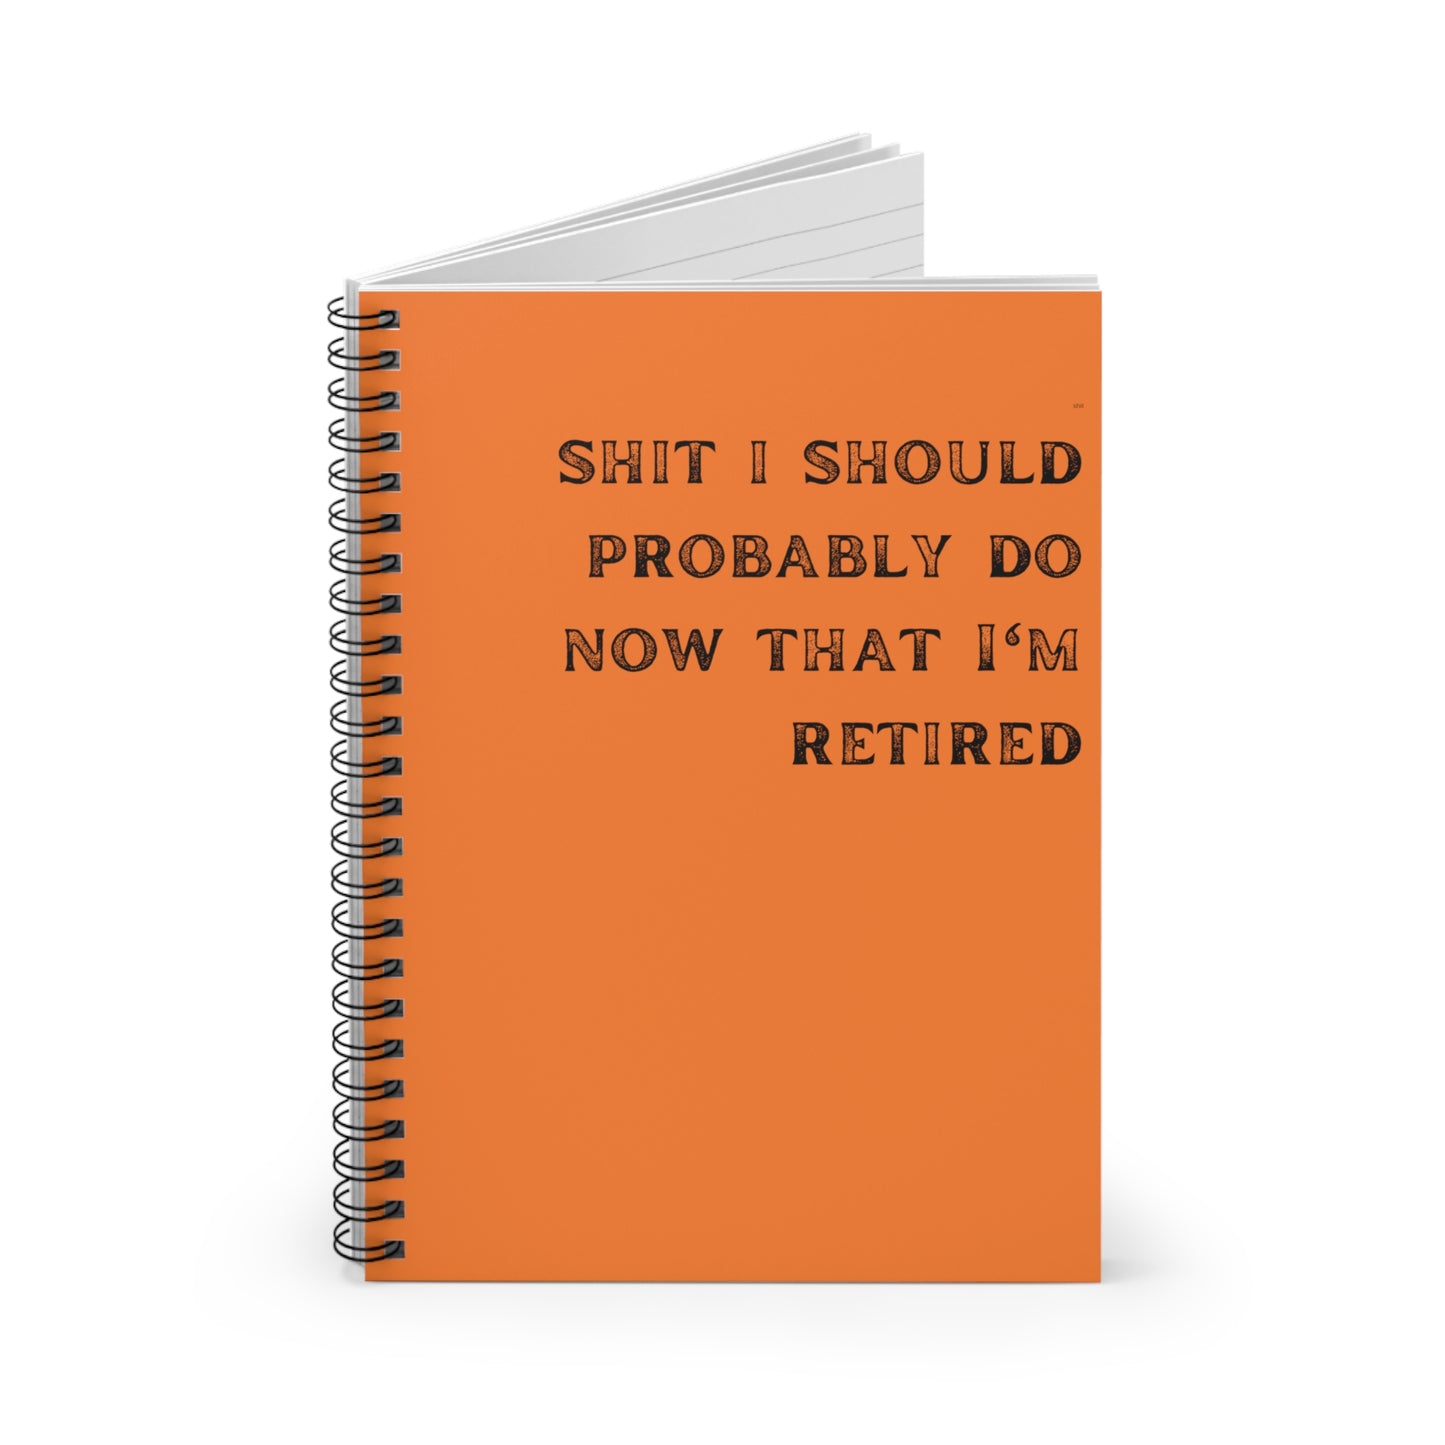 Shit I should probably do that I'm retired, notebook, spiral, retirement gift, boss gift, early retirement